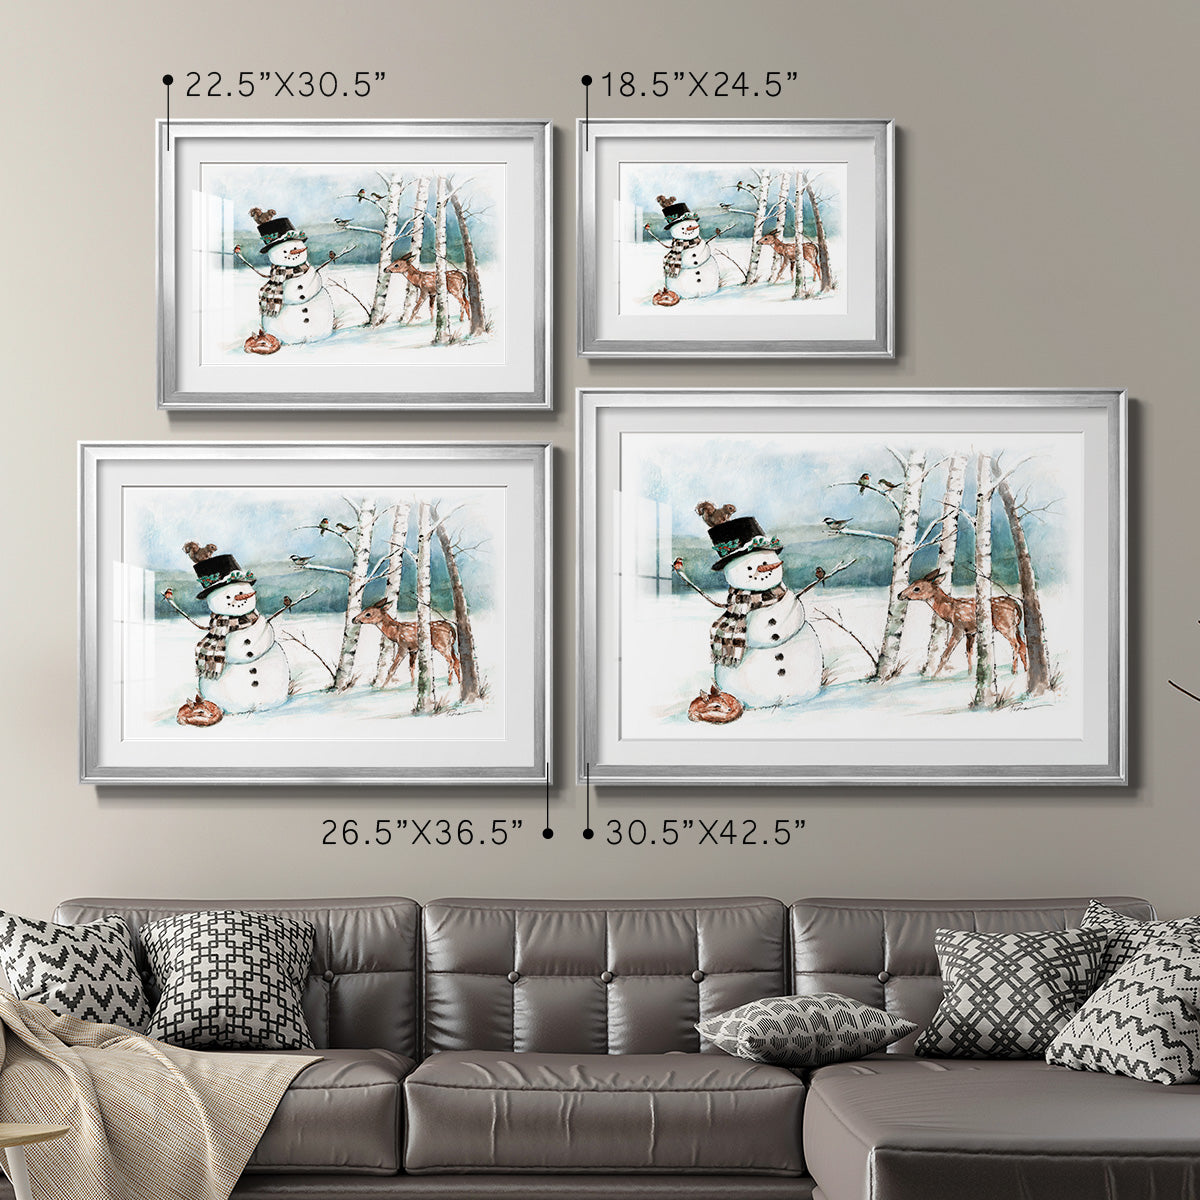 Snow Friends Premium Framed Print - Ready to Hang